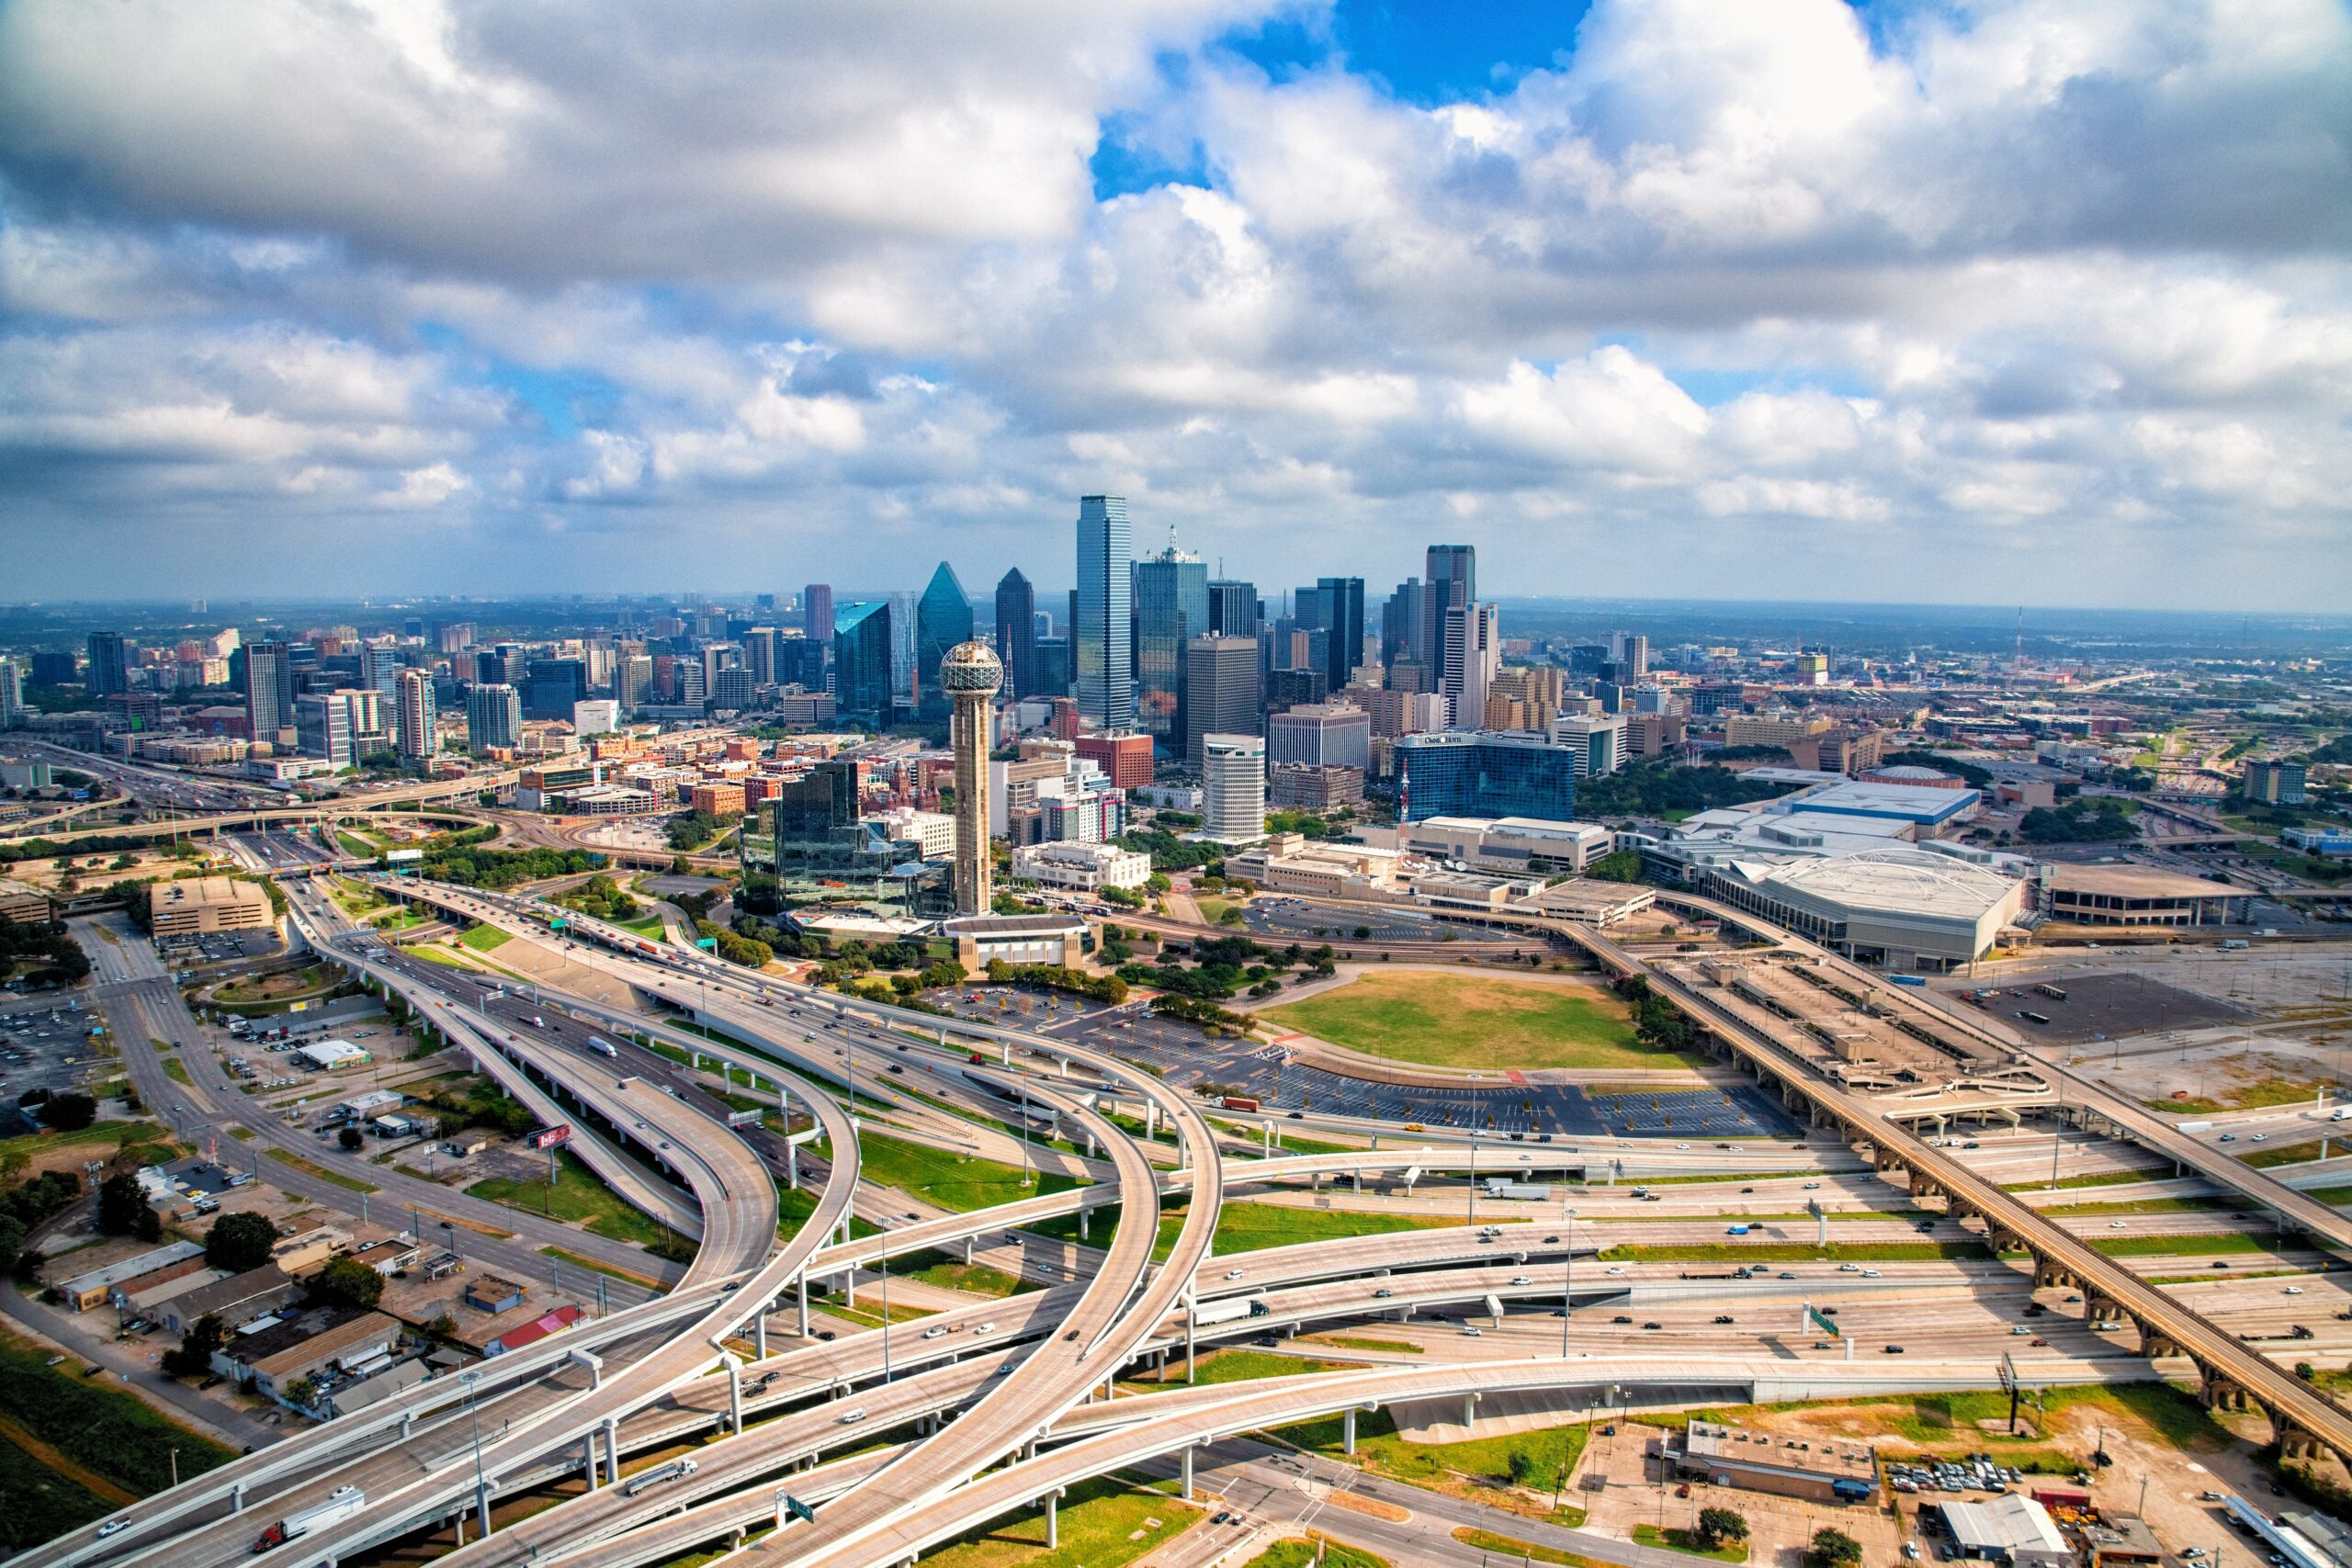 This is an aerial view of the spaghetti bowl-like highways leading into Dallas, skyscrapers standing tall in the background.